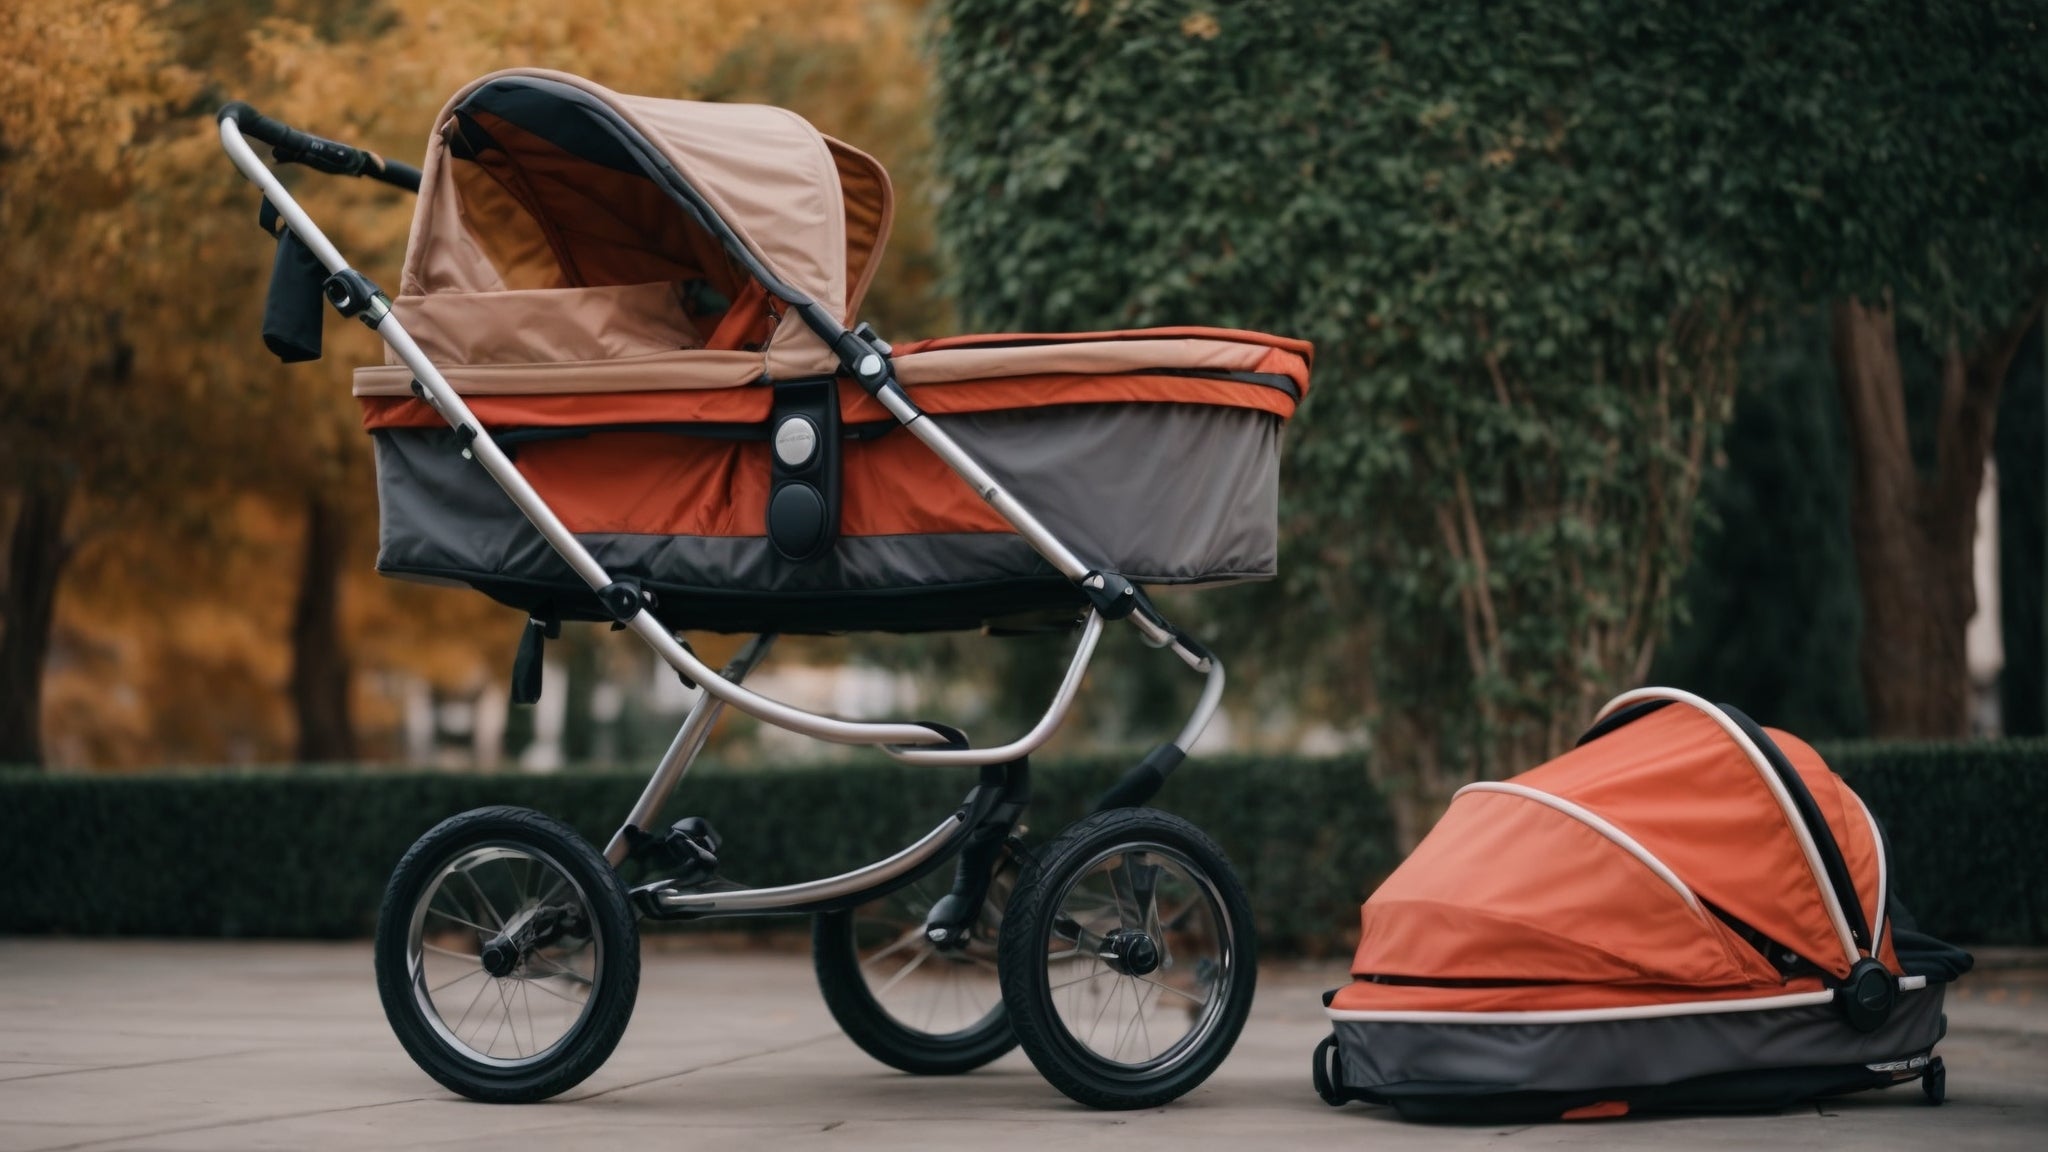 Choosing the Perfect Baby Stroller for Your Little One